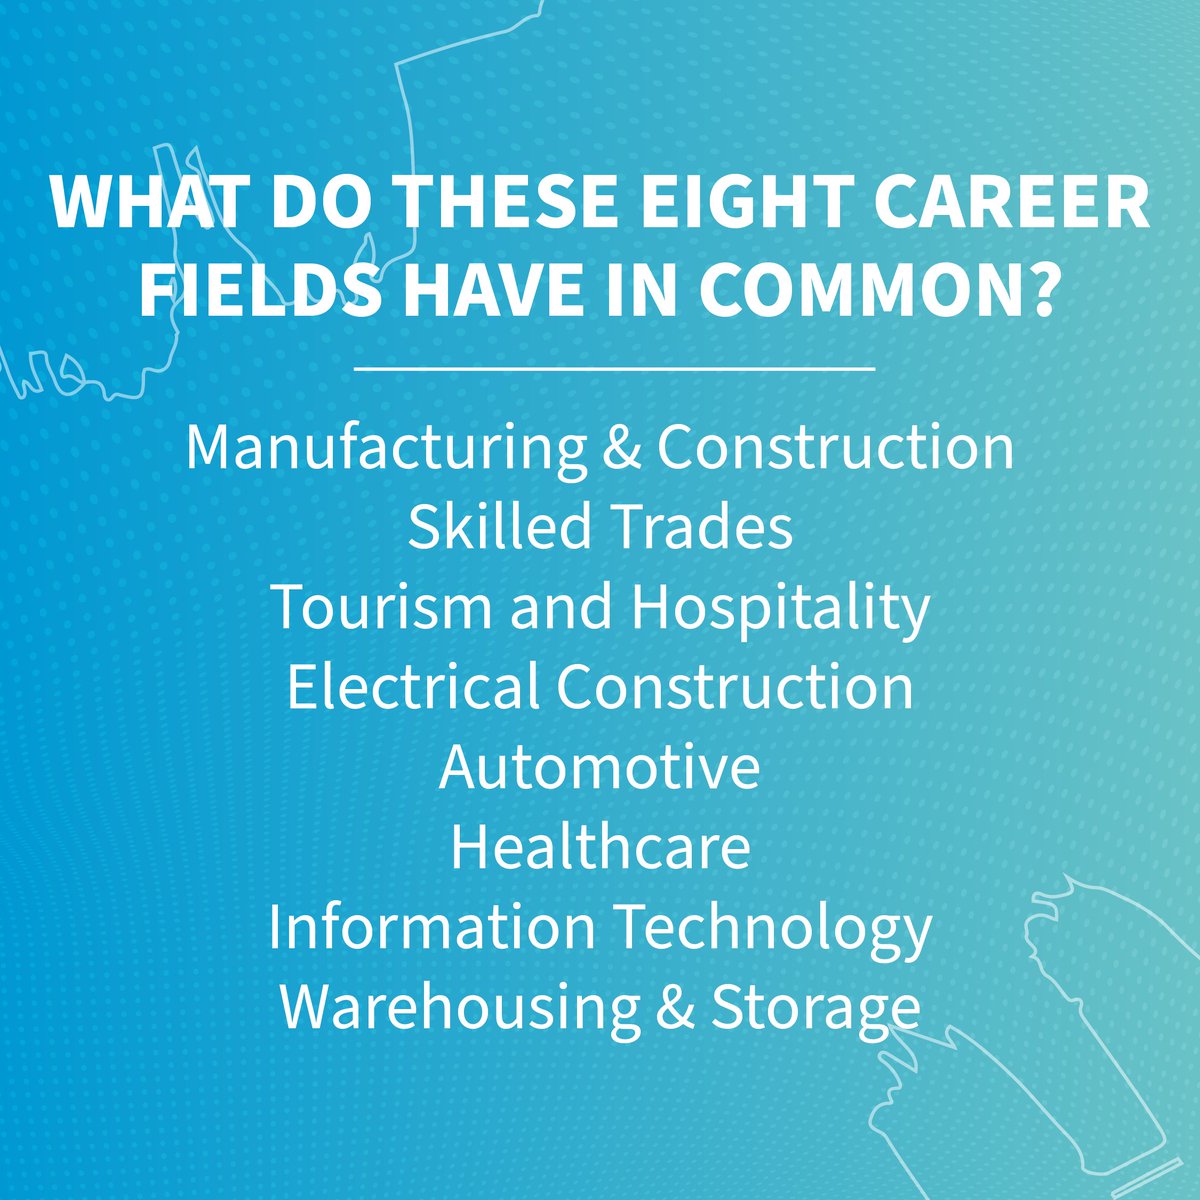 These are the career fields you can explore virtually when you make an appointment at your local BCW/Workforce OhioMeansJobs centers. Call or contact one of our offices today to explore your next career! loom.ly/QzeflOU #OhioMeansJobs #BCWWorkforce #ContactUs